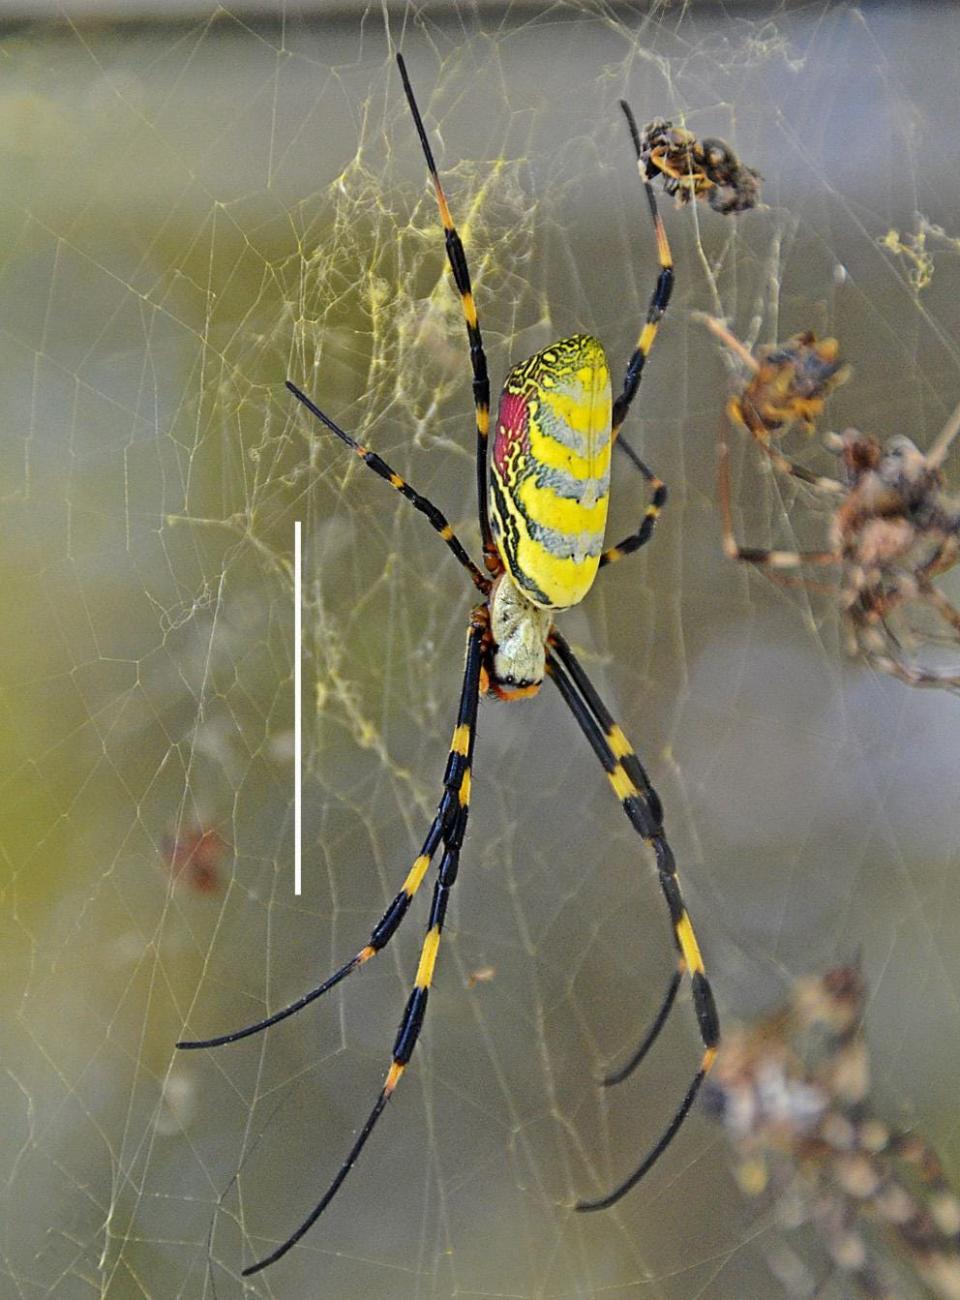 The Joro spider from Asia has settled in Northeast Georgia.